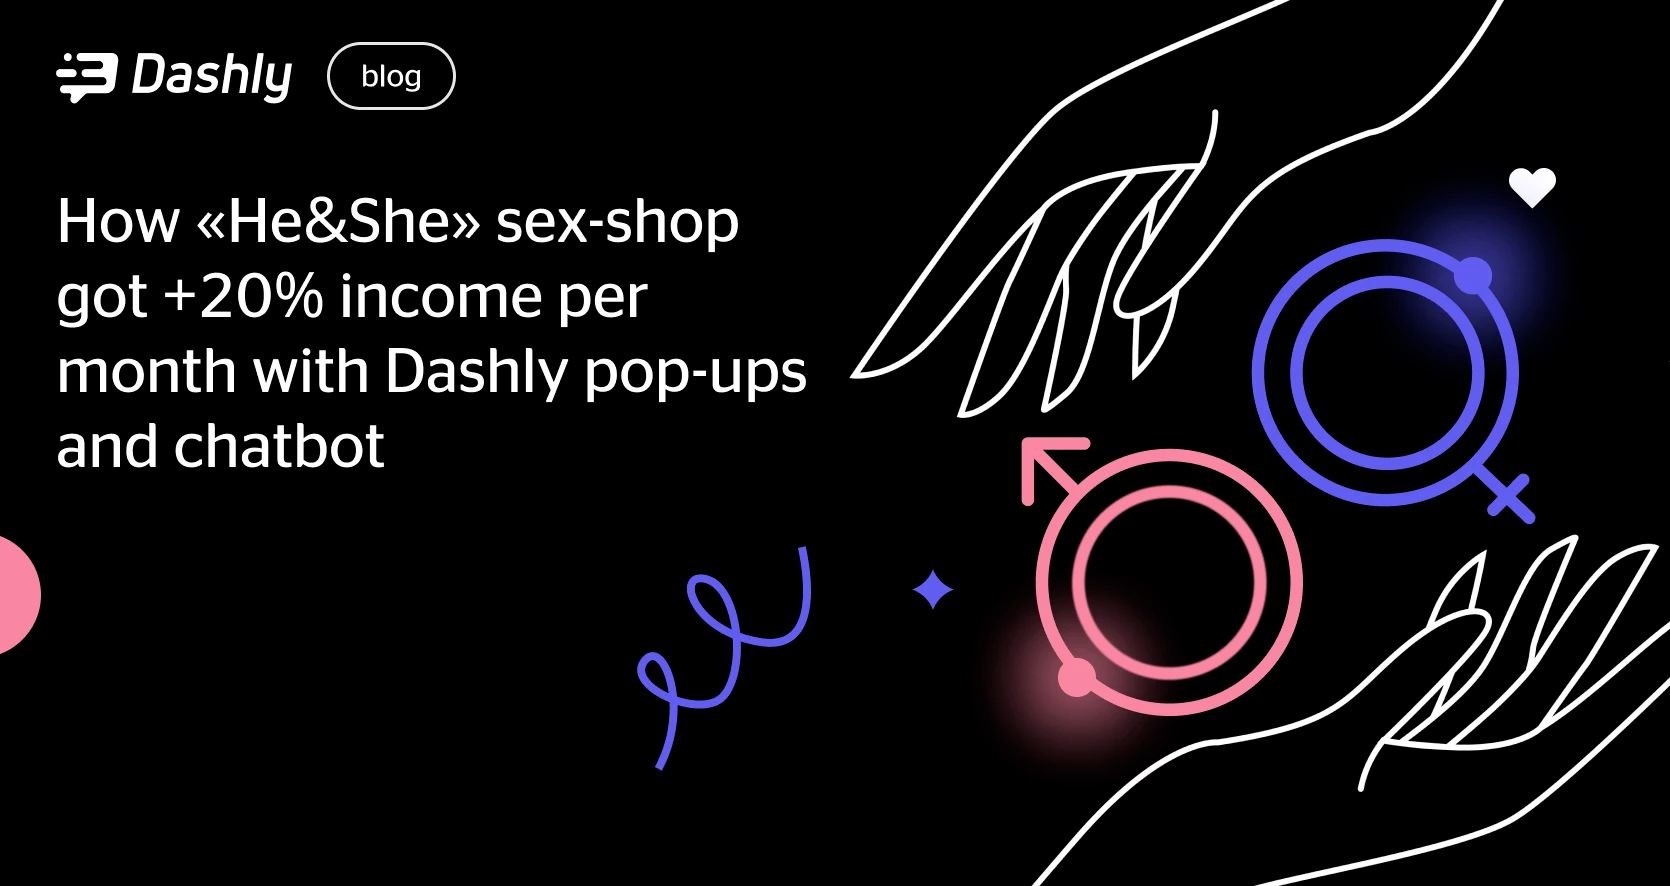 How “He&She” sex-shop got +20% income per month with Dashly pop-up and chatbot